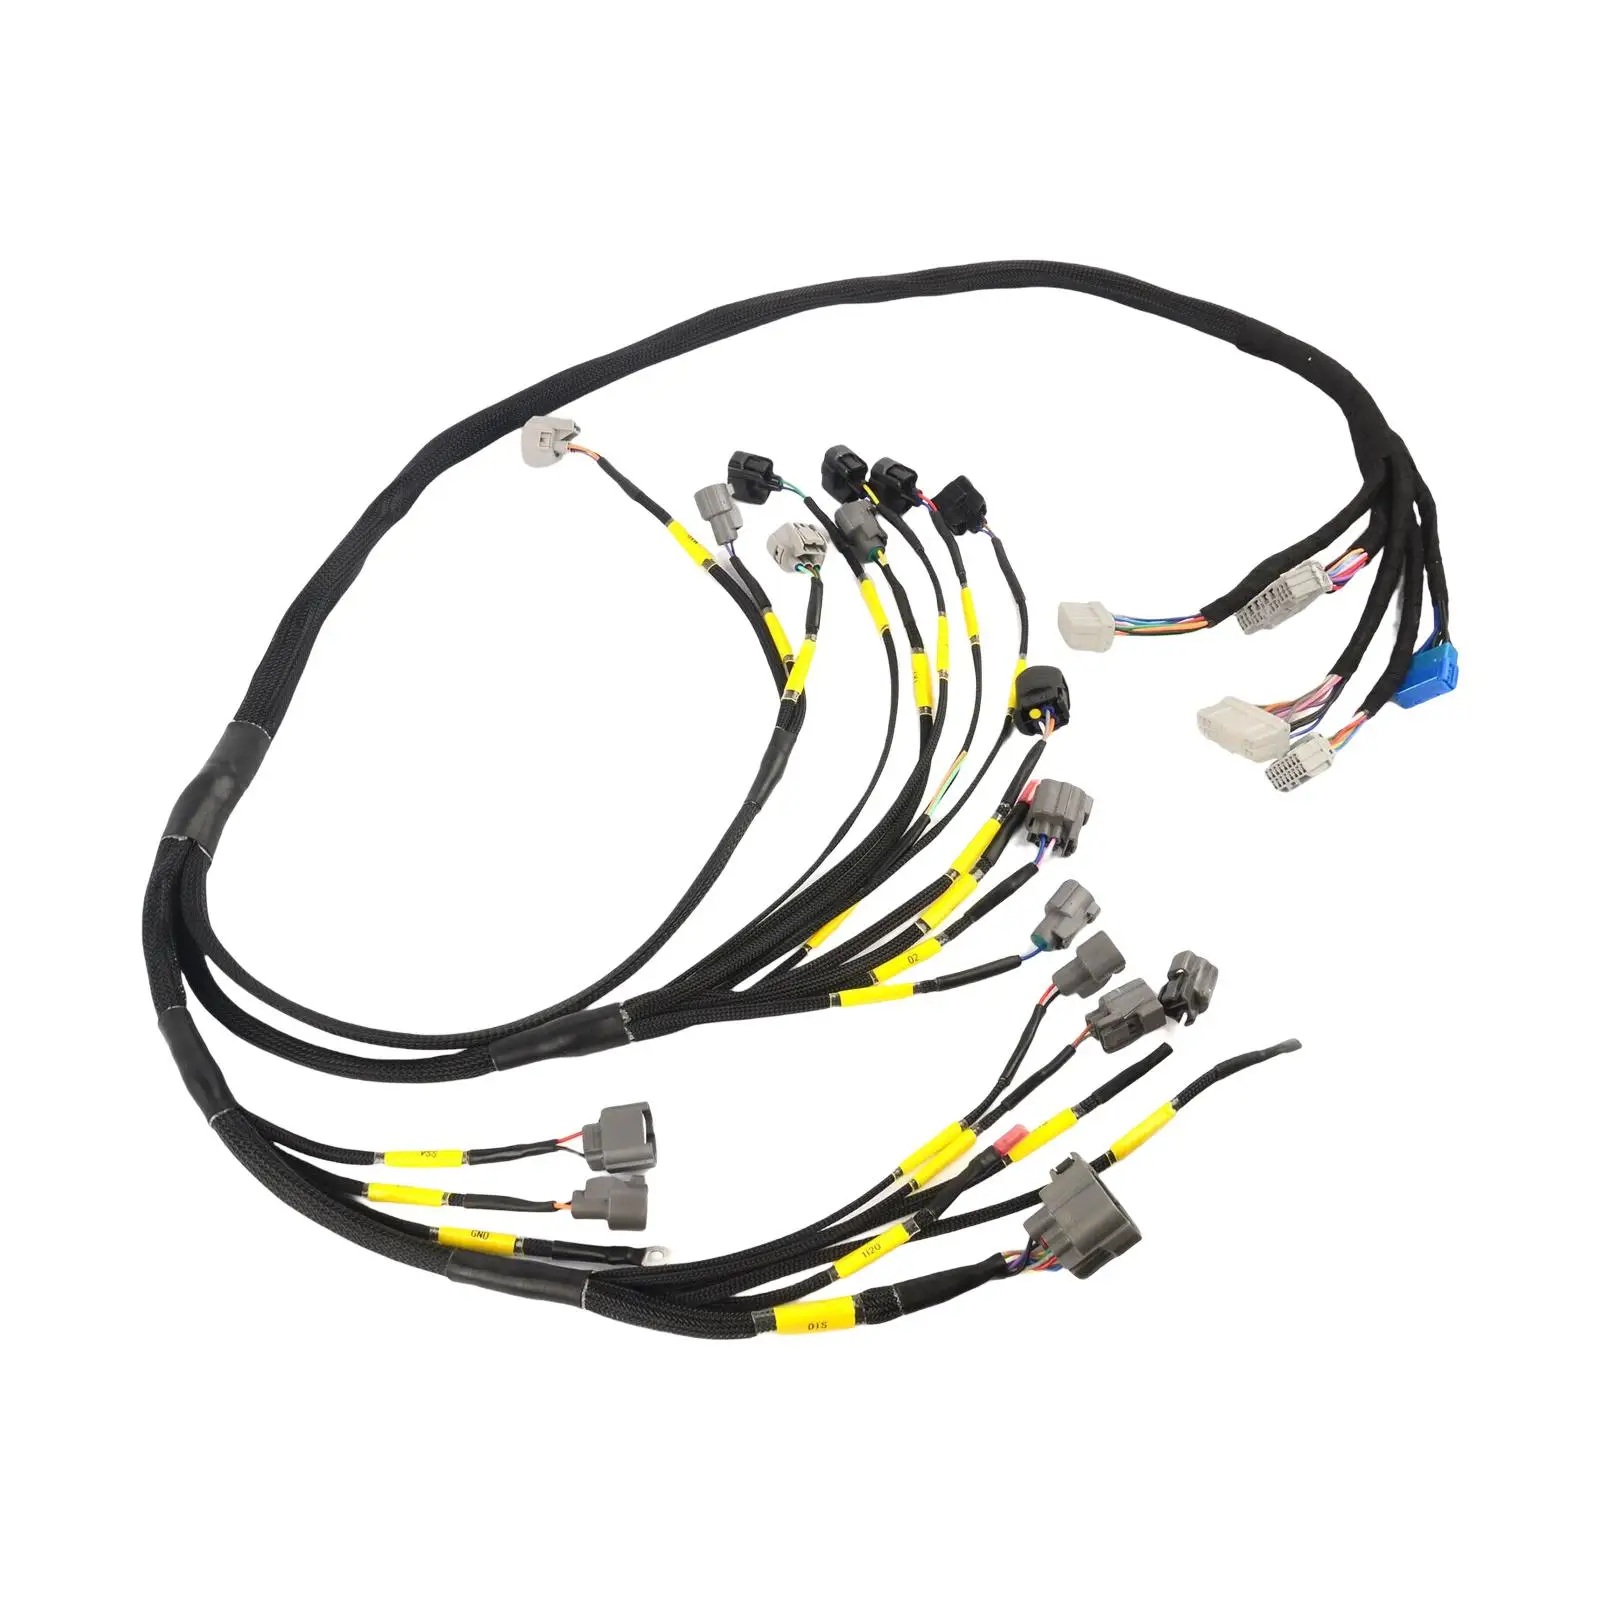 Engine Wiring Harness Cnch-Obd2-1 Automotive Accessory Replacement Easily Install Professional Durable Spare Parts